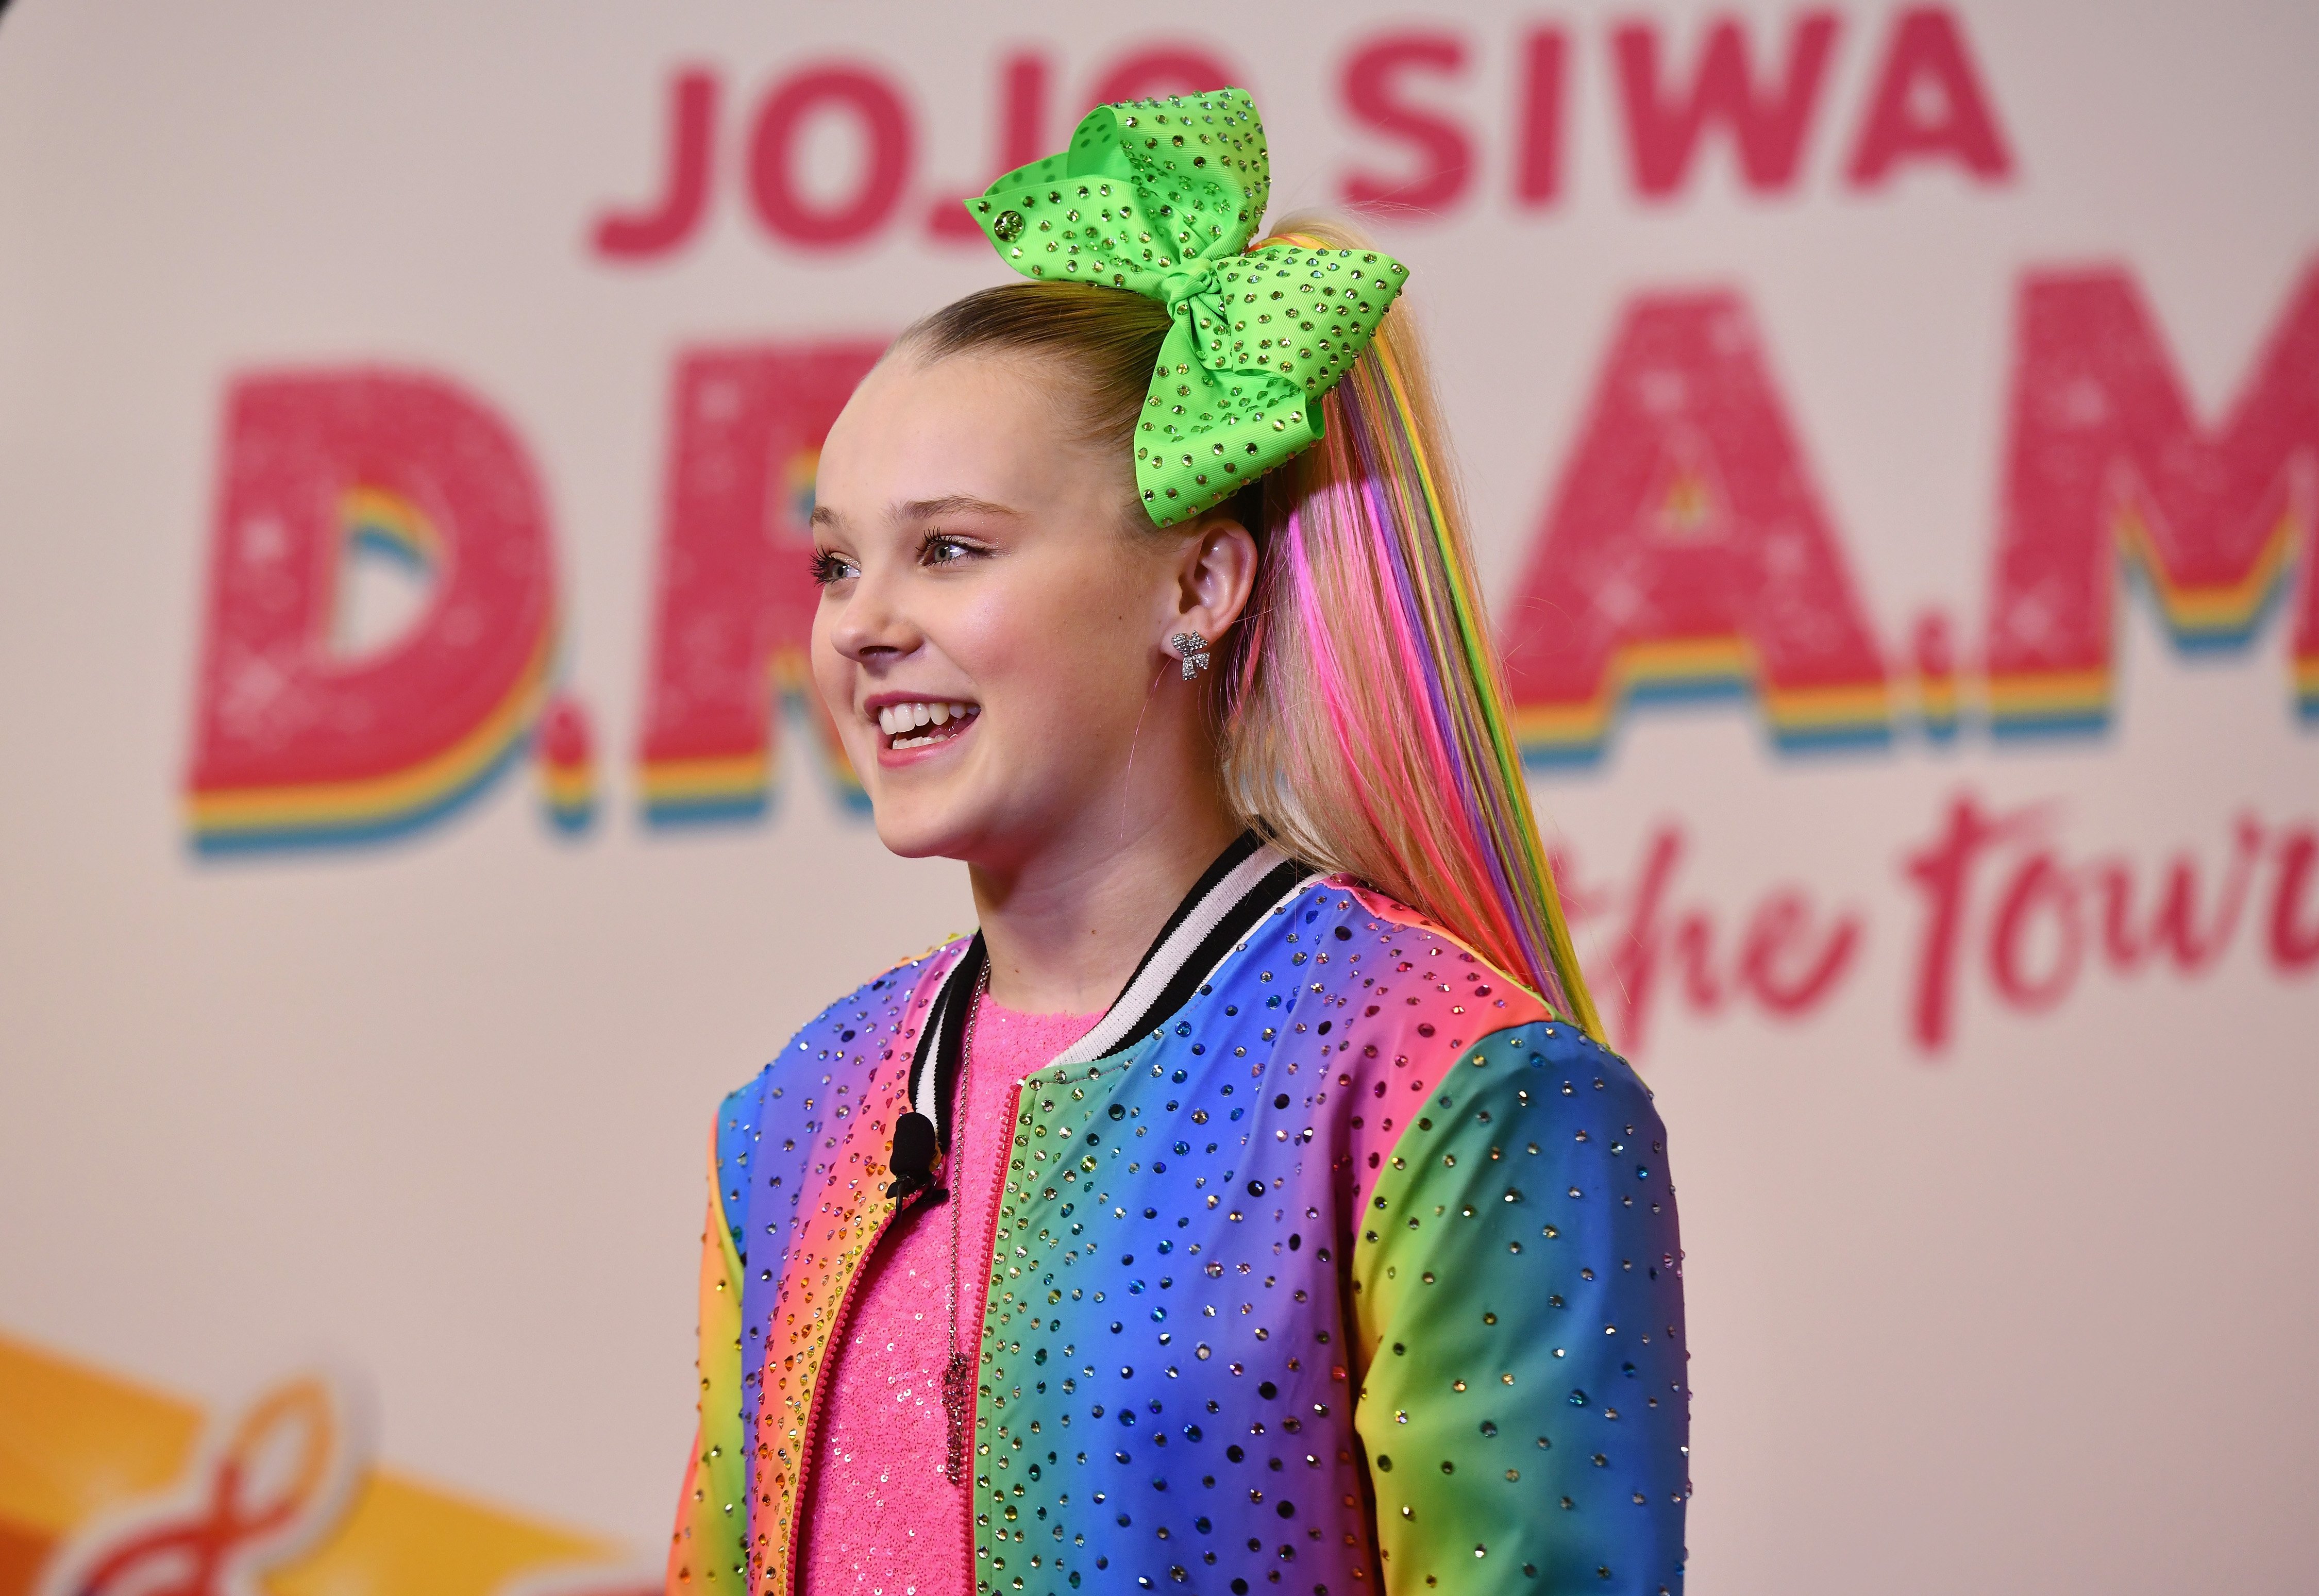 JoJo Siwa announcing her upcoming EP and D.R.E.A.M. Tour. Source | Photo: Getty Images 